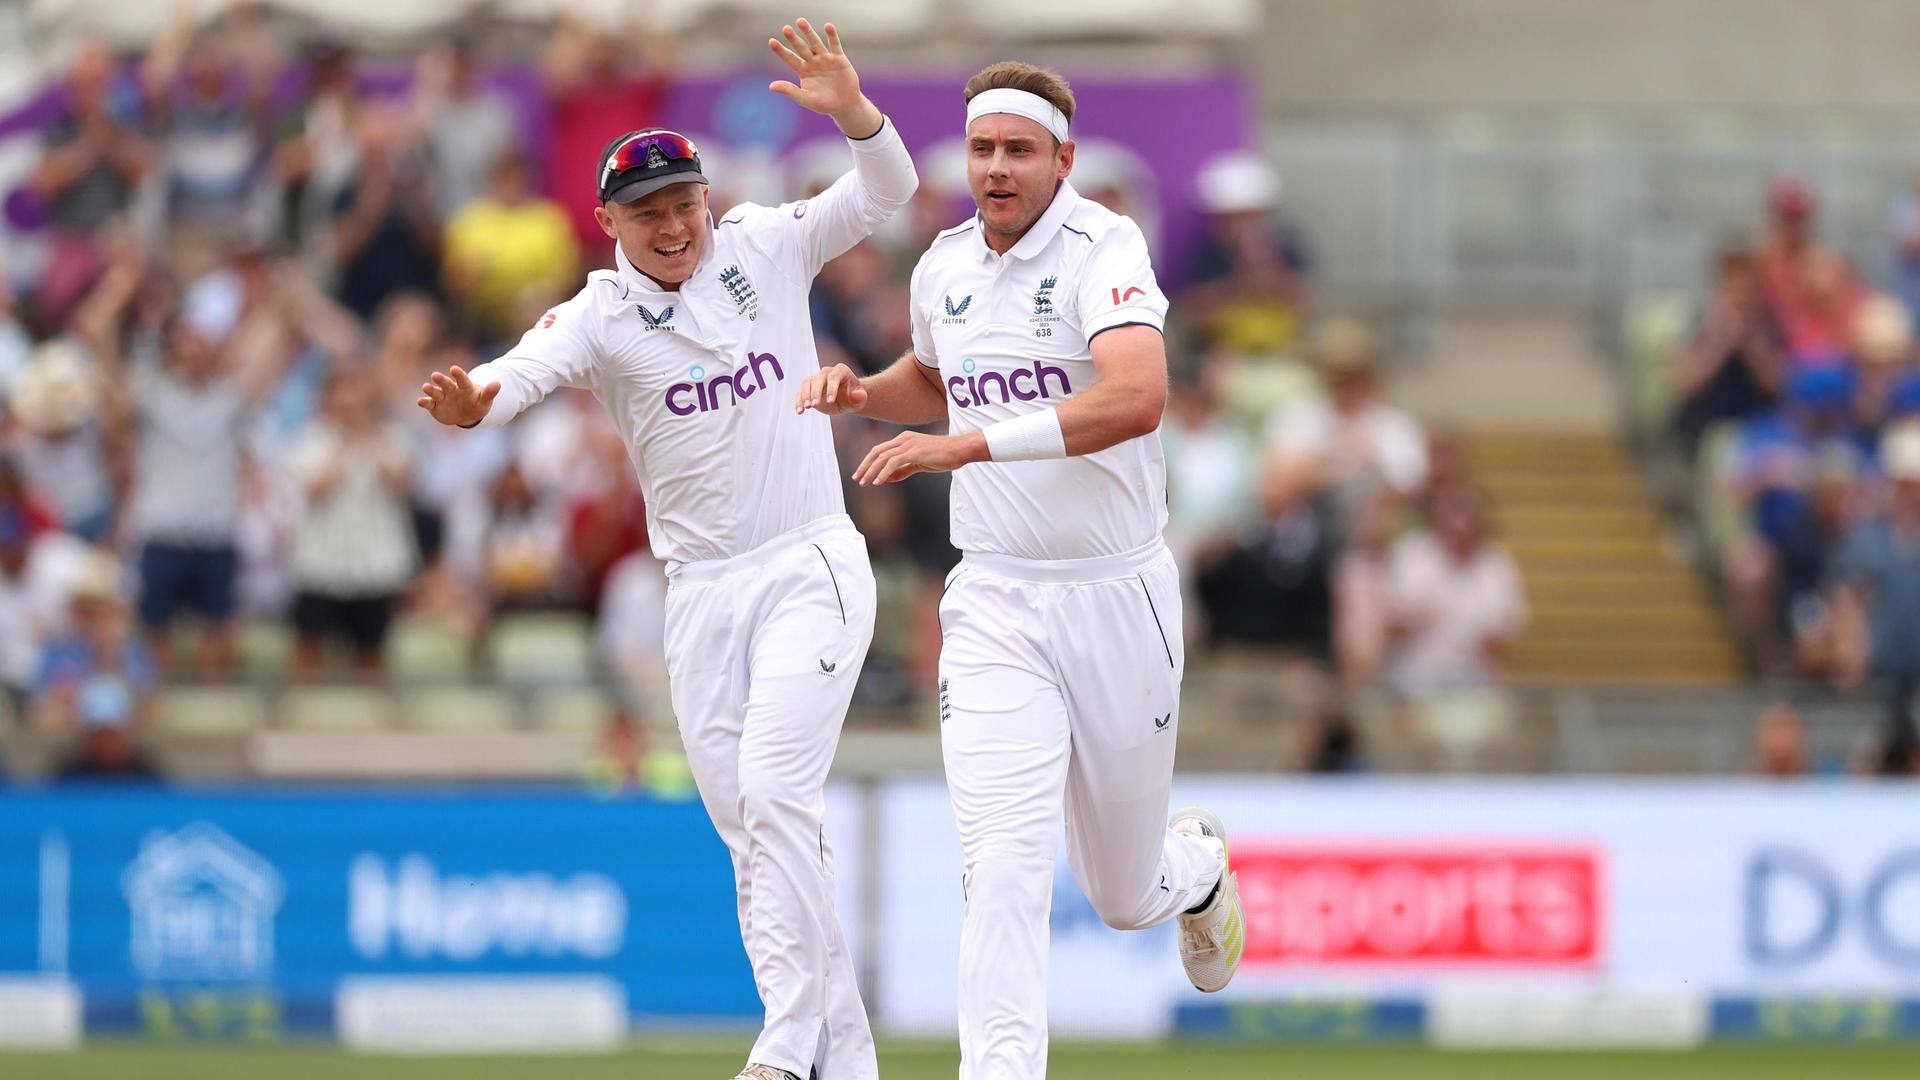 The Ashes, Broad removes Warner for the 15th time: Stats